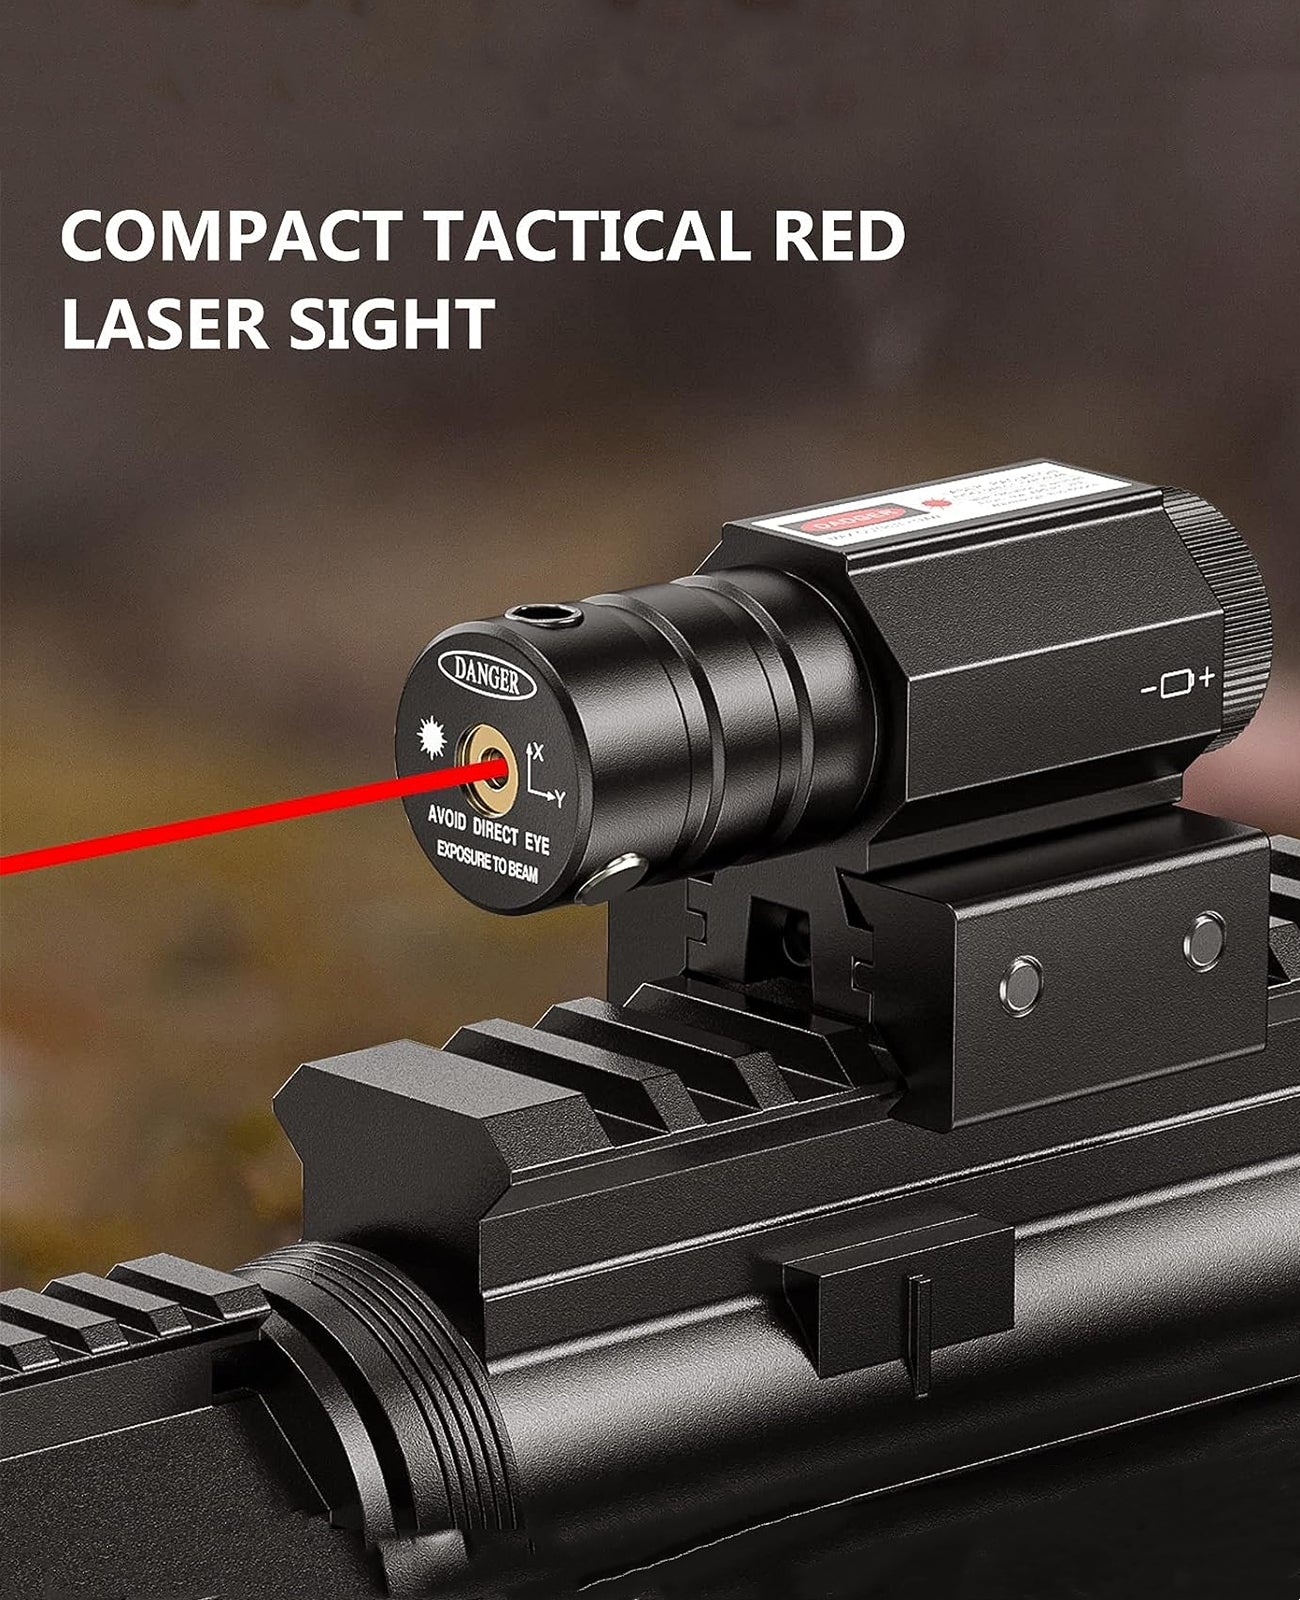 Compact Tactical Red Laser Sight for Rifles